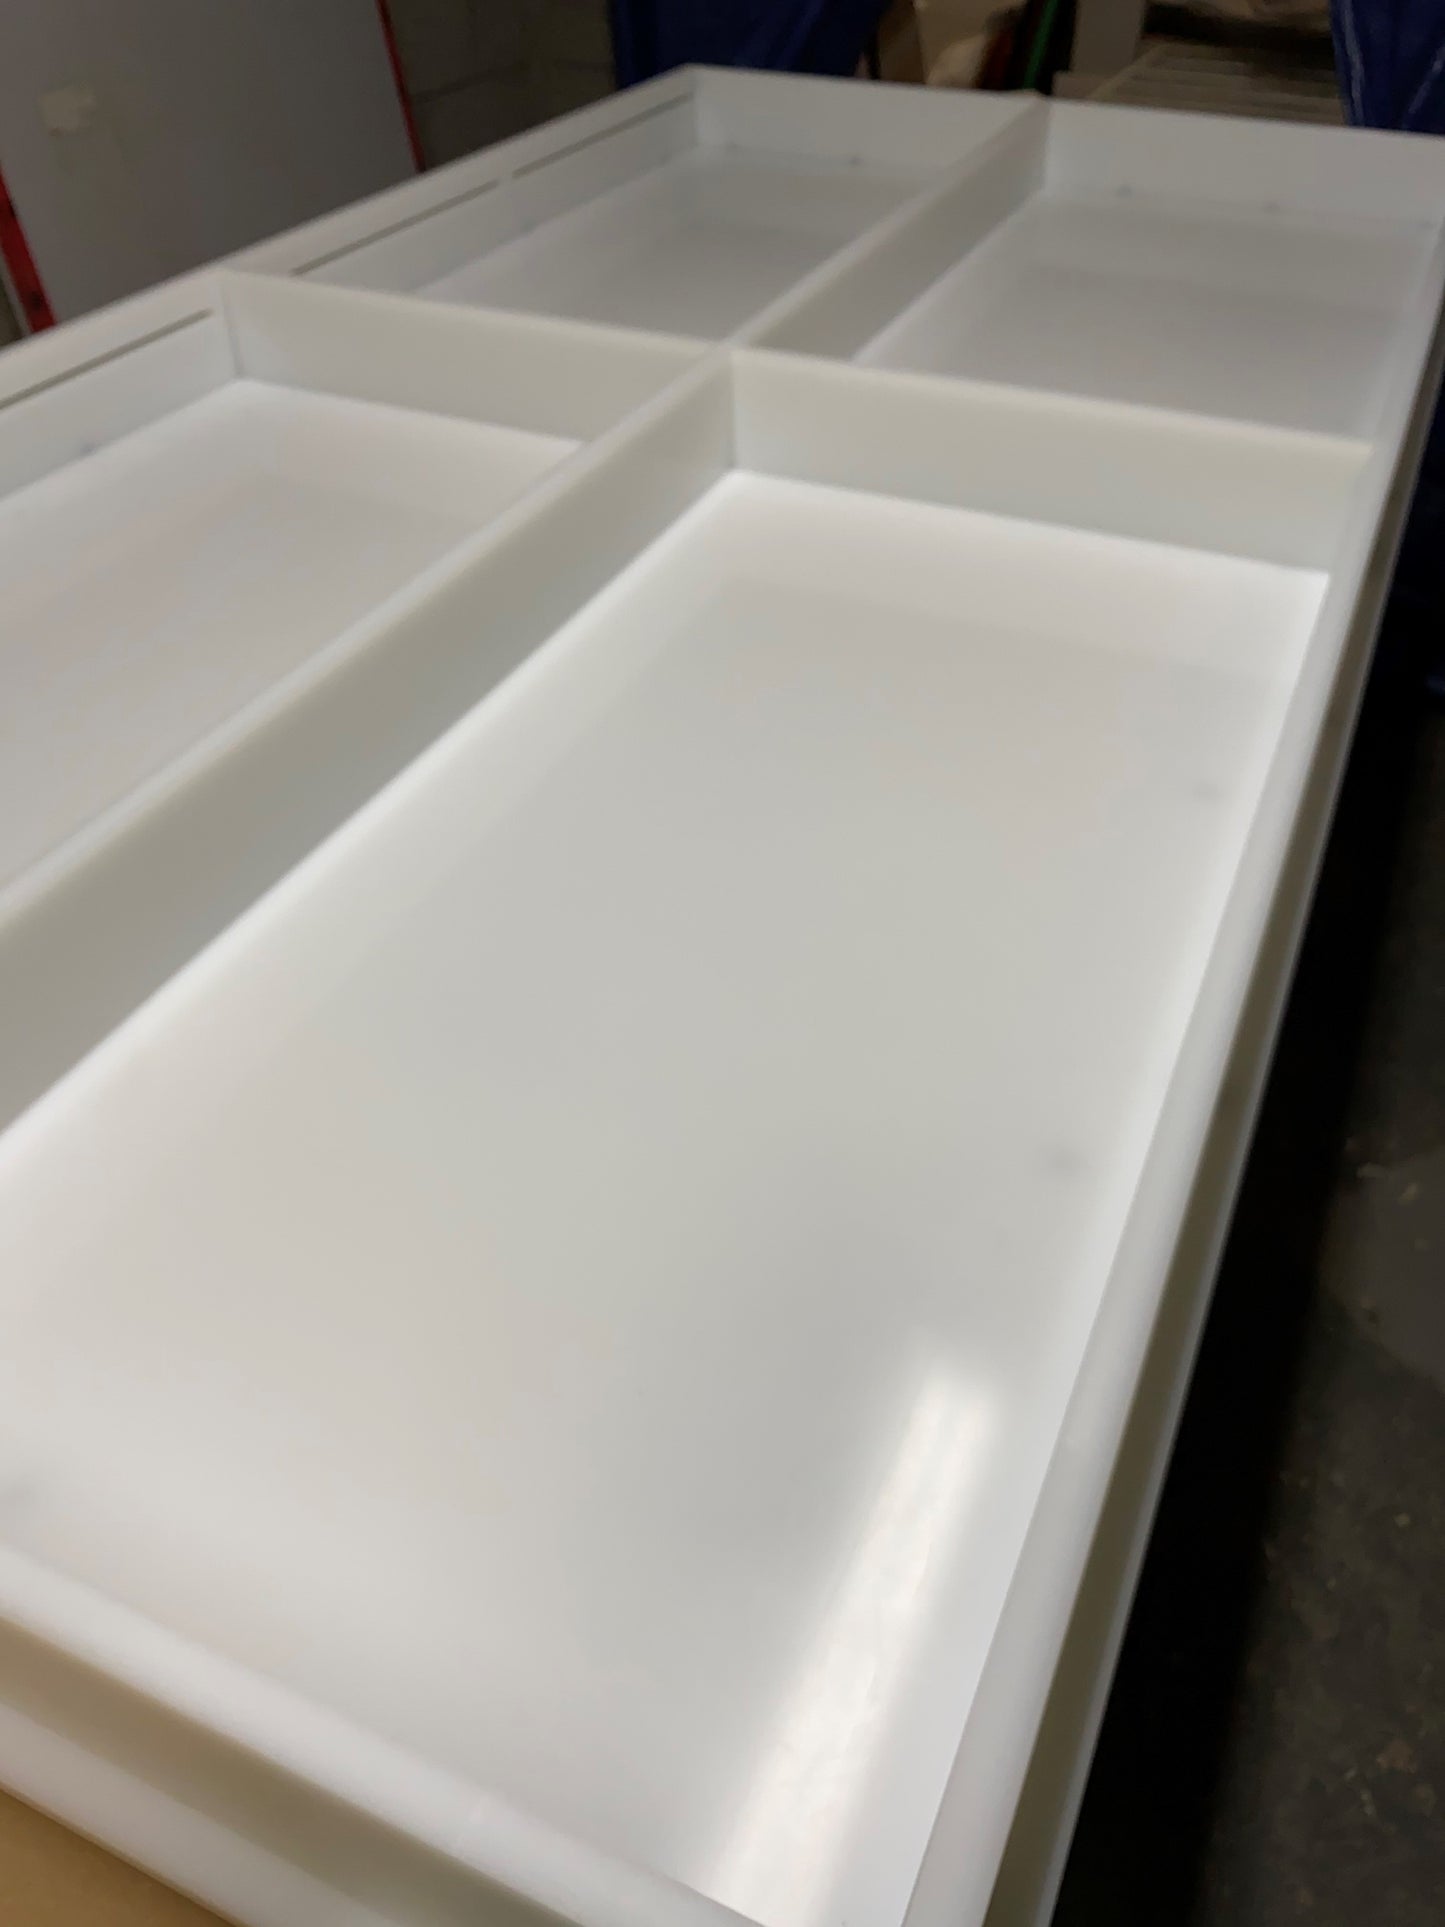 HDPE table forms